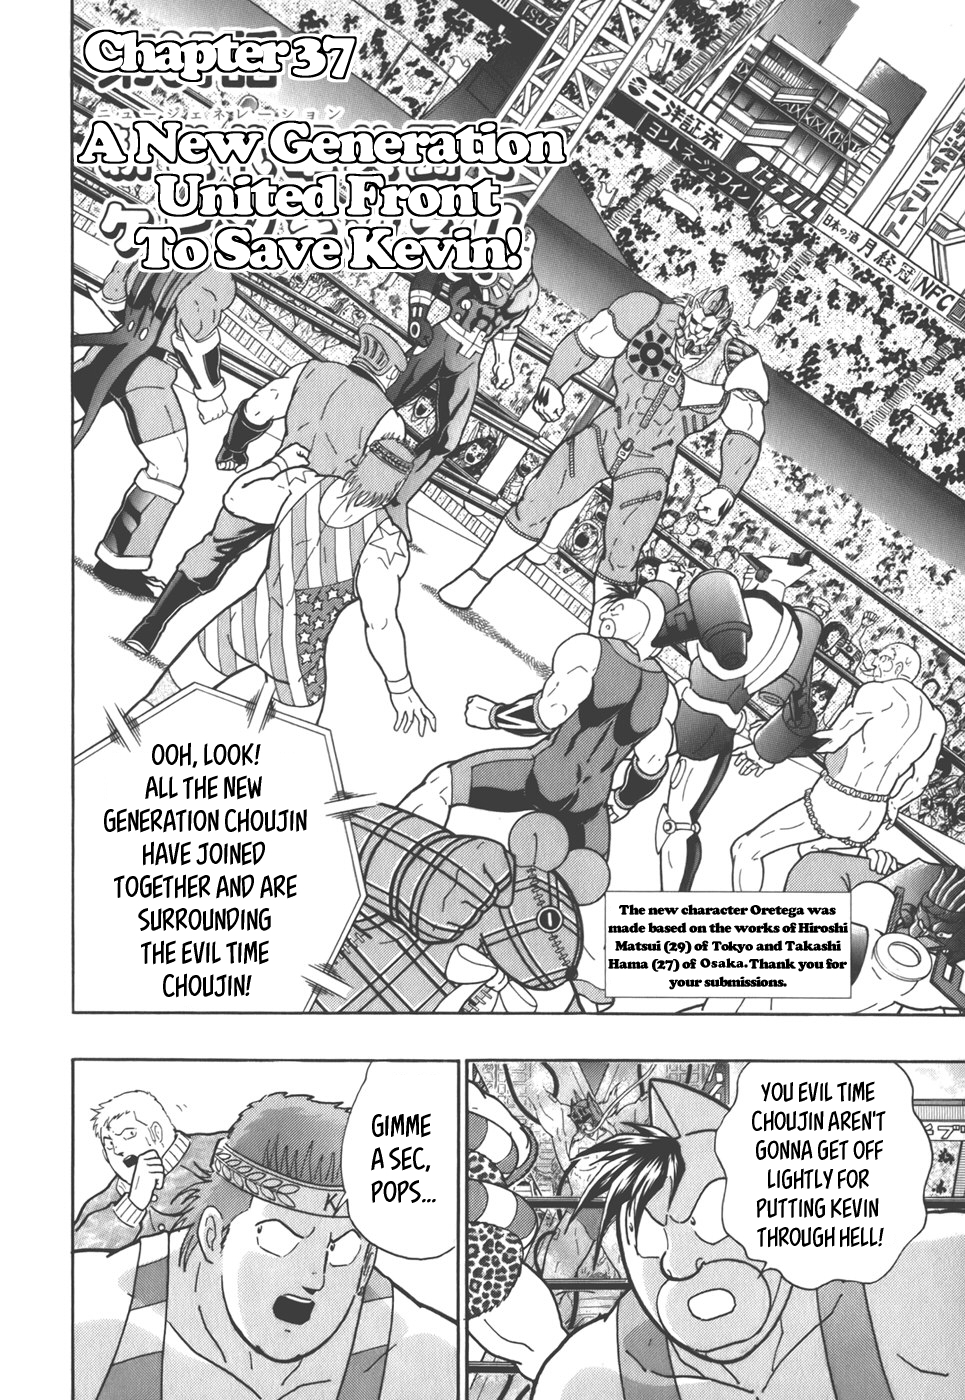 Kinnikuman Nisei: Ultimate Choujin Tag Vol. 4 Ch. 37 A New Generation United Front to Save Kevin!